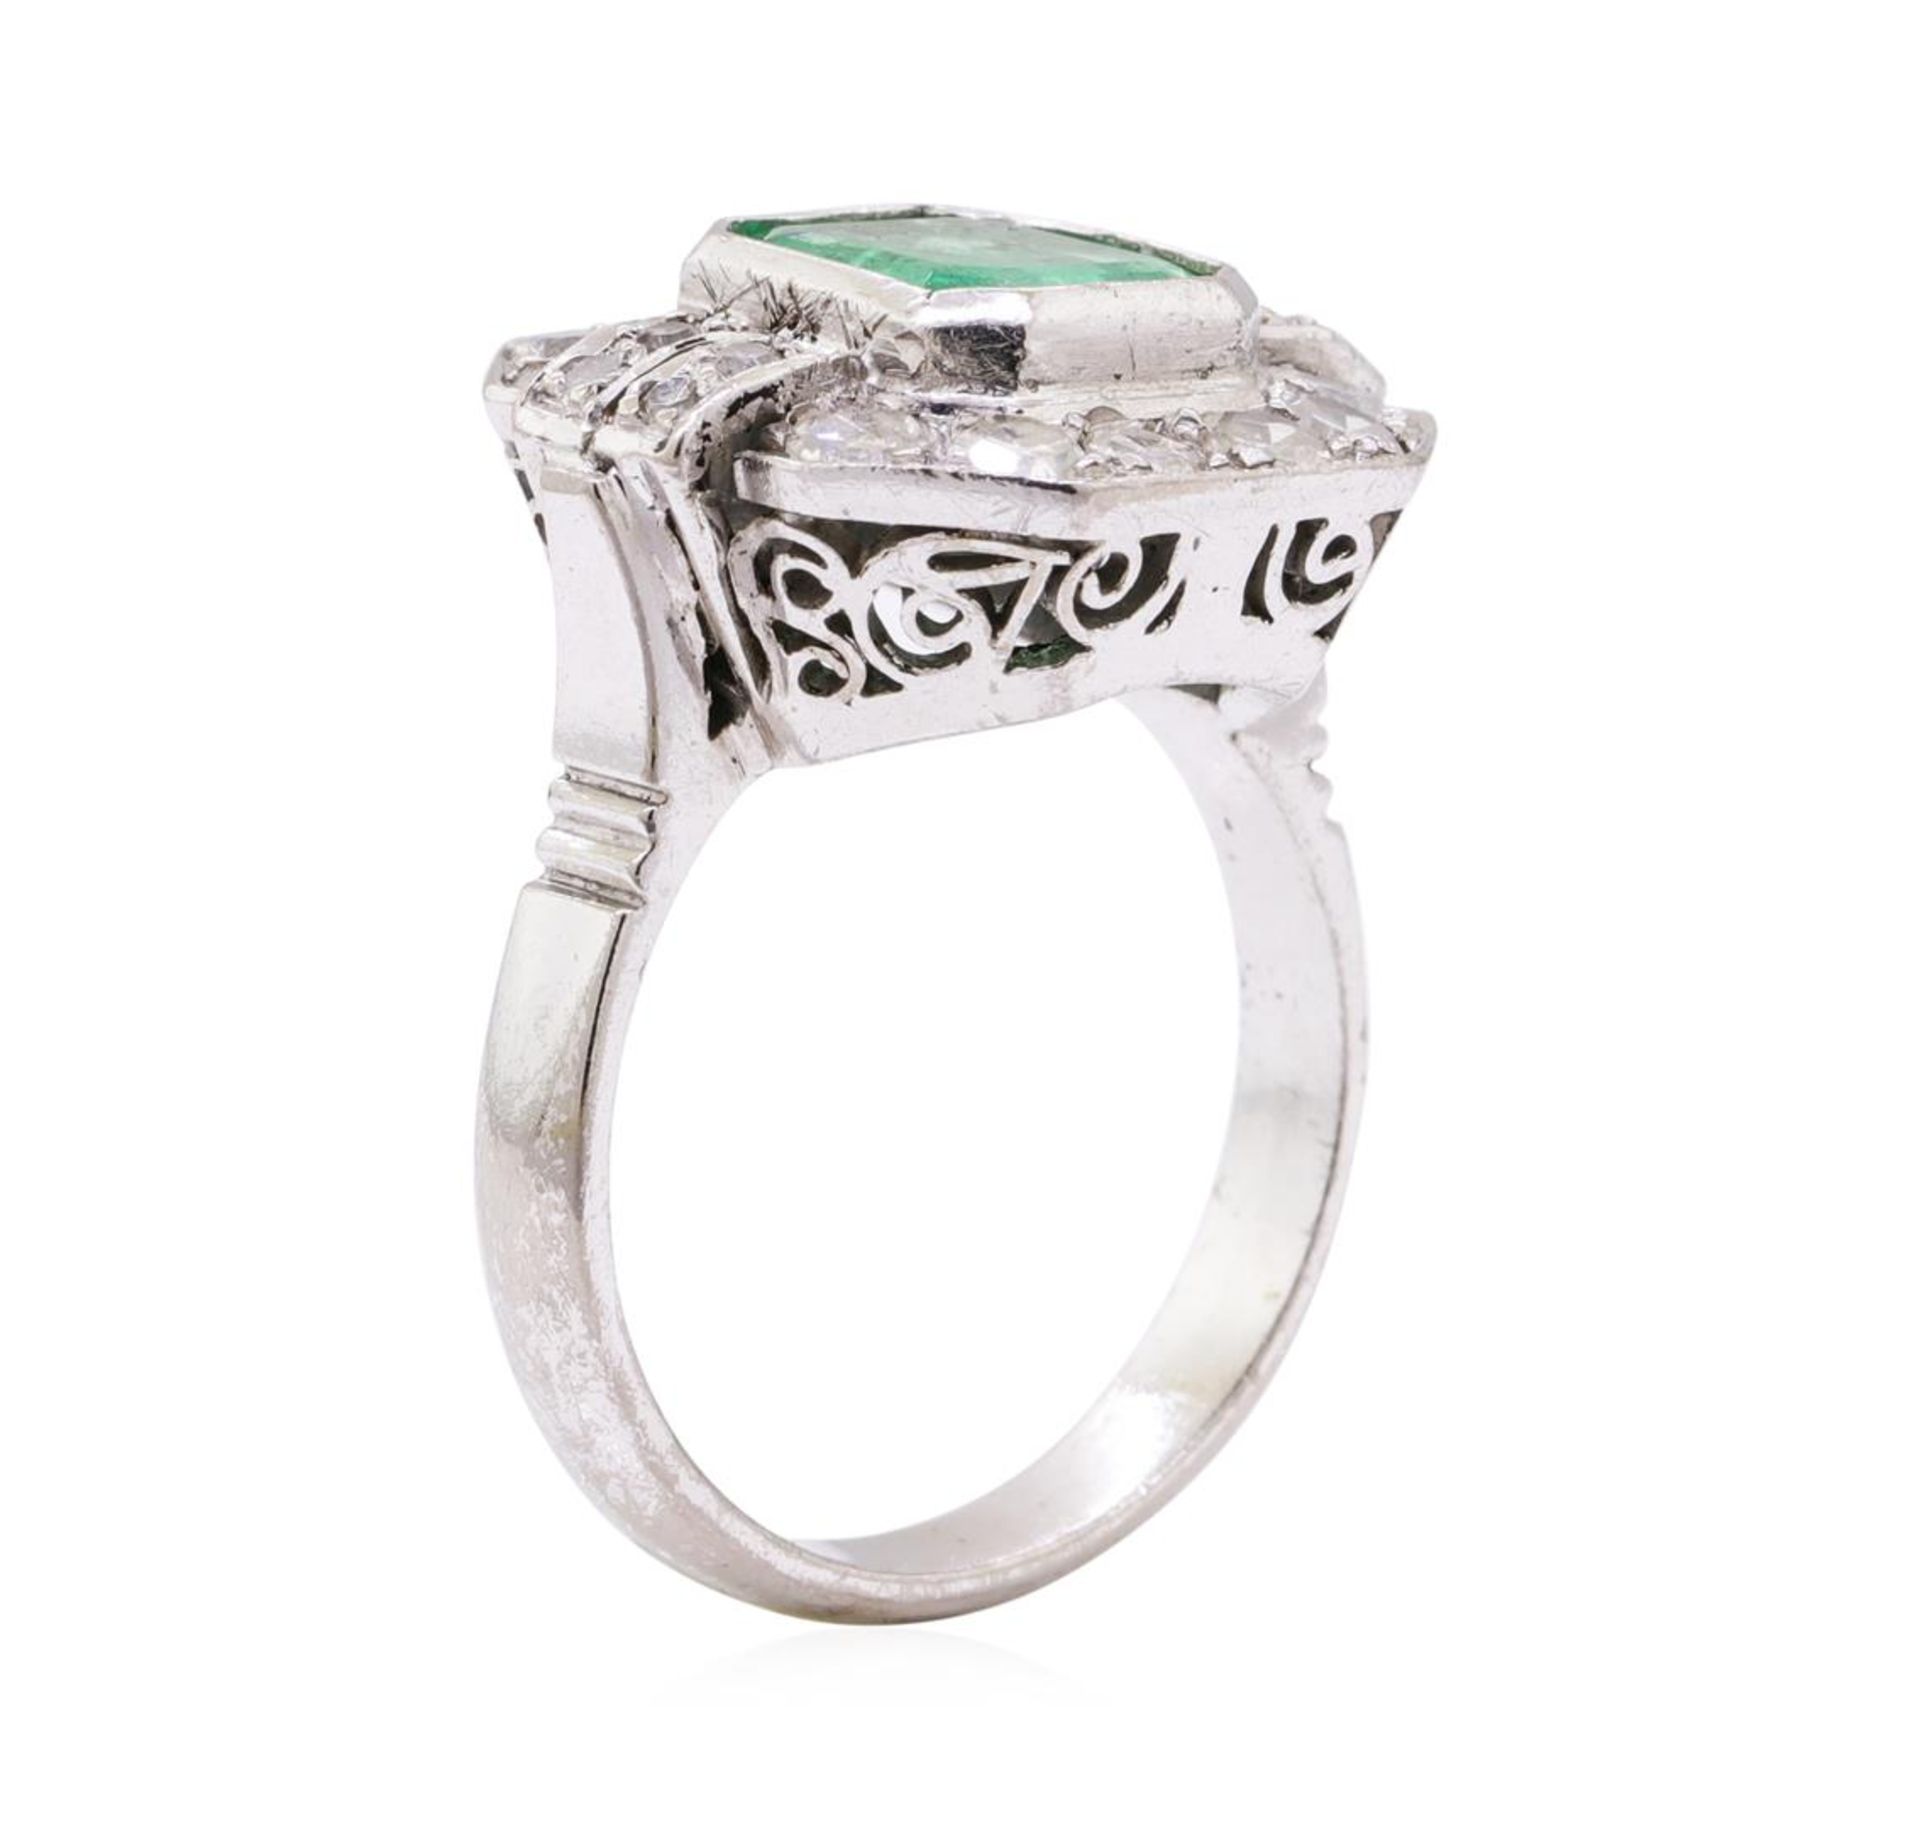 7.80 ctw Emerald And Diamond Ring And Earrings - 14KT White Gold - Image 4 of 7